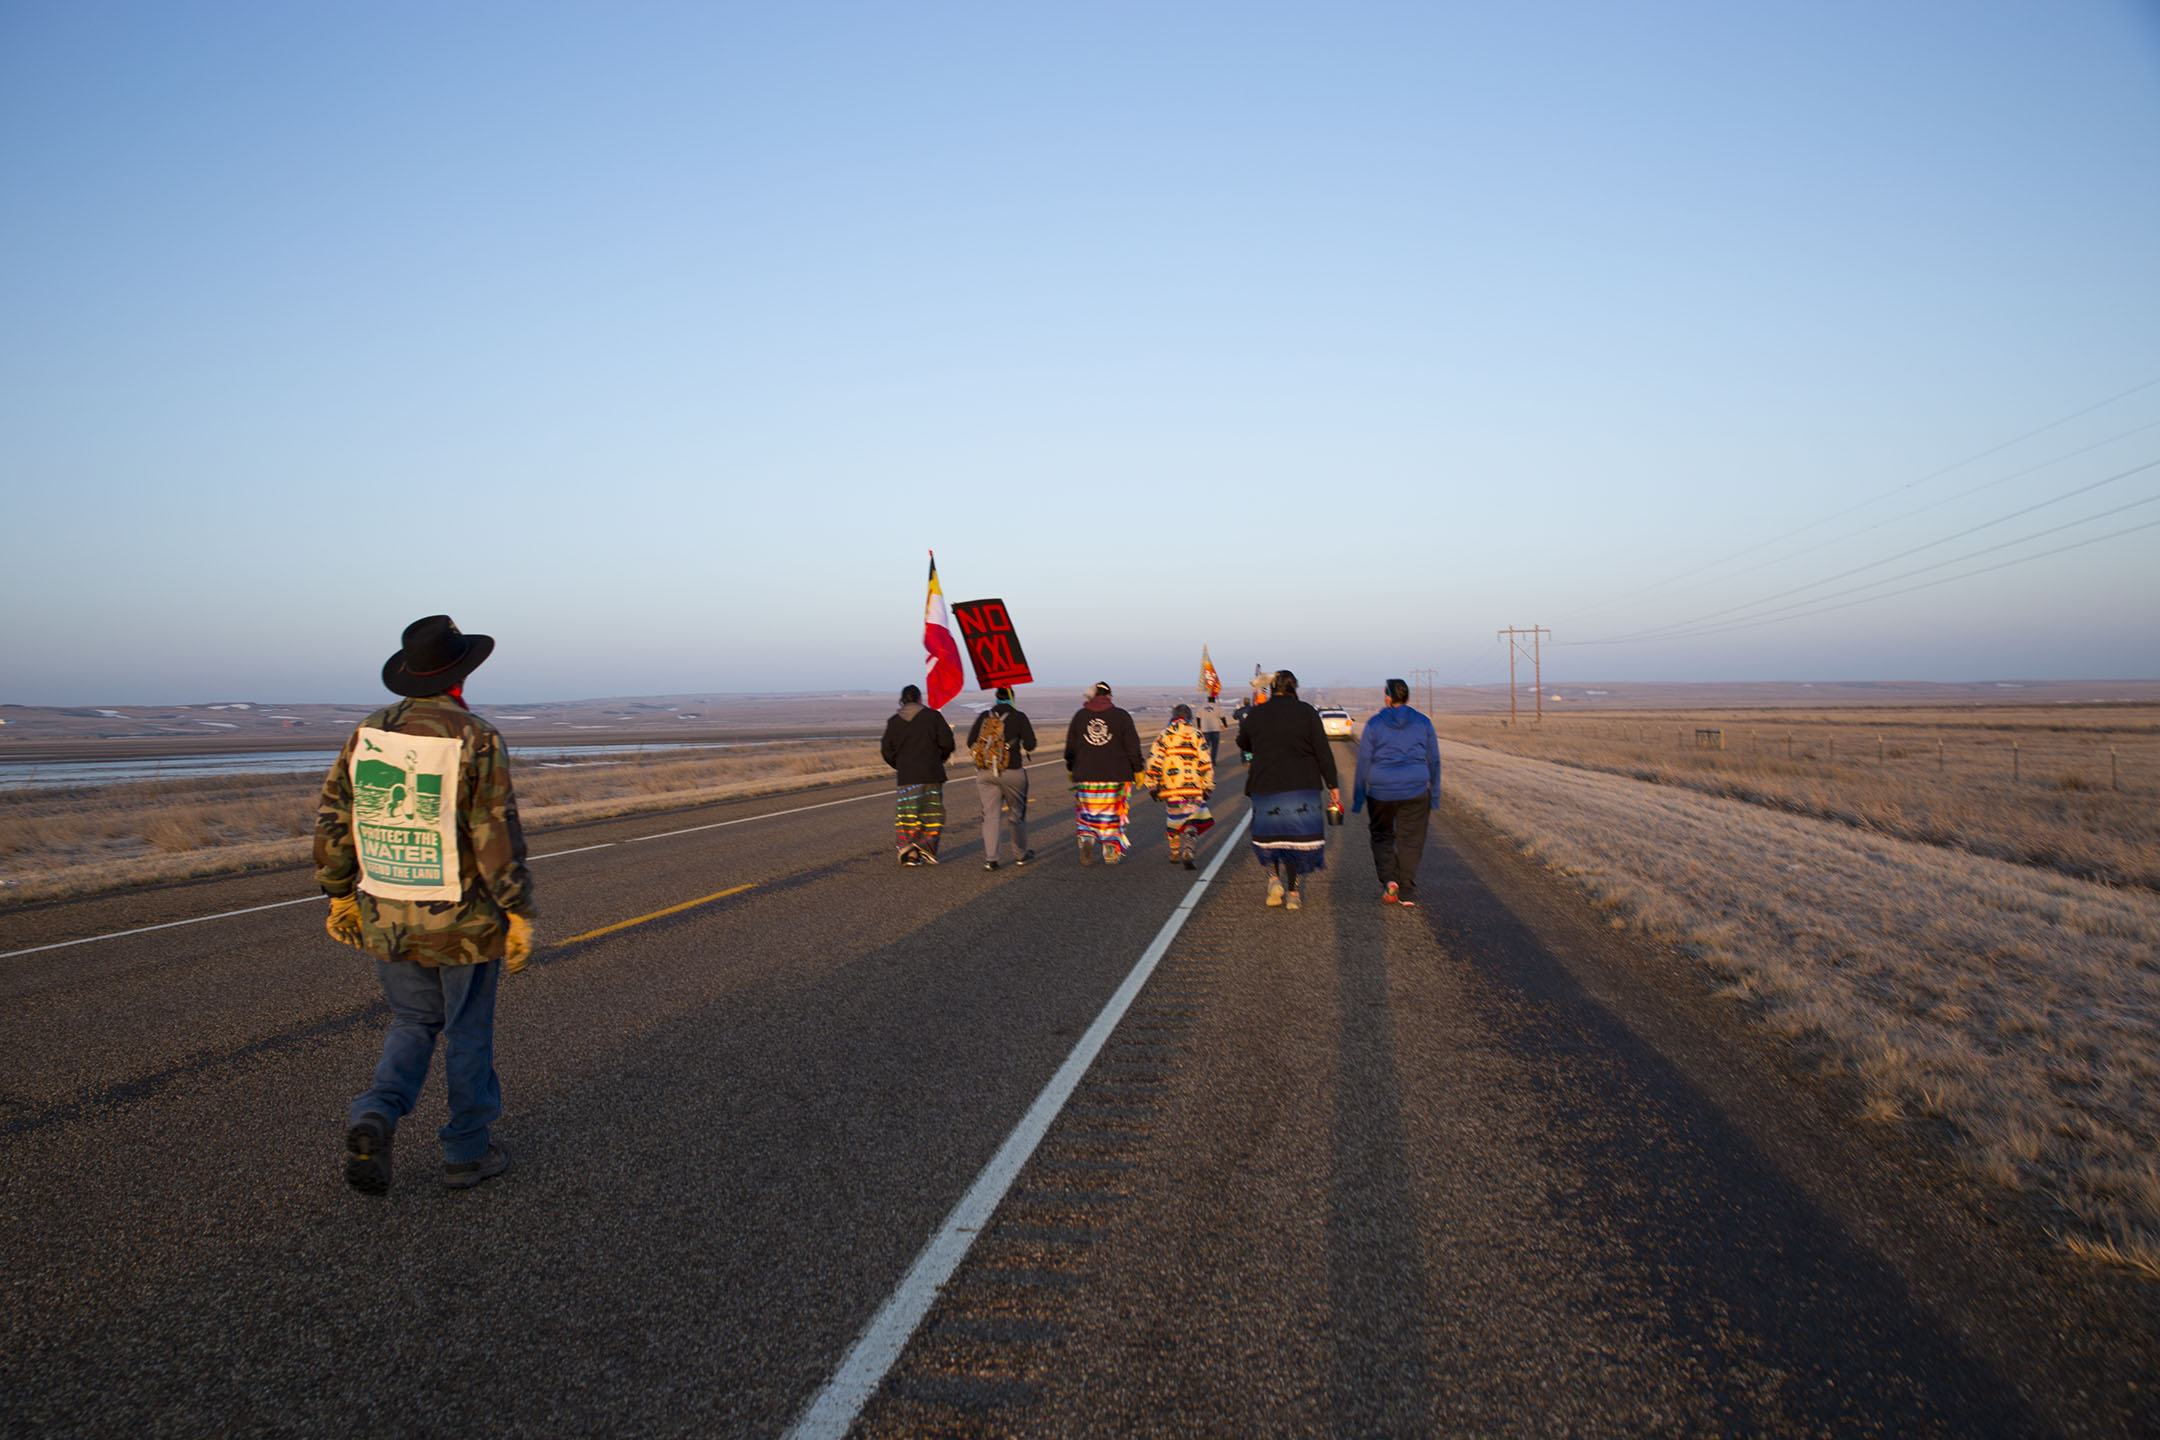 As a veteran and leader in the community, Lance Four Star helped organize and lead community members in a walk protesting the Keystone XL pipeline.